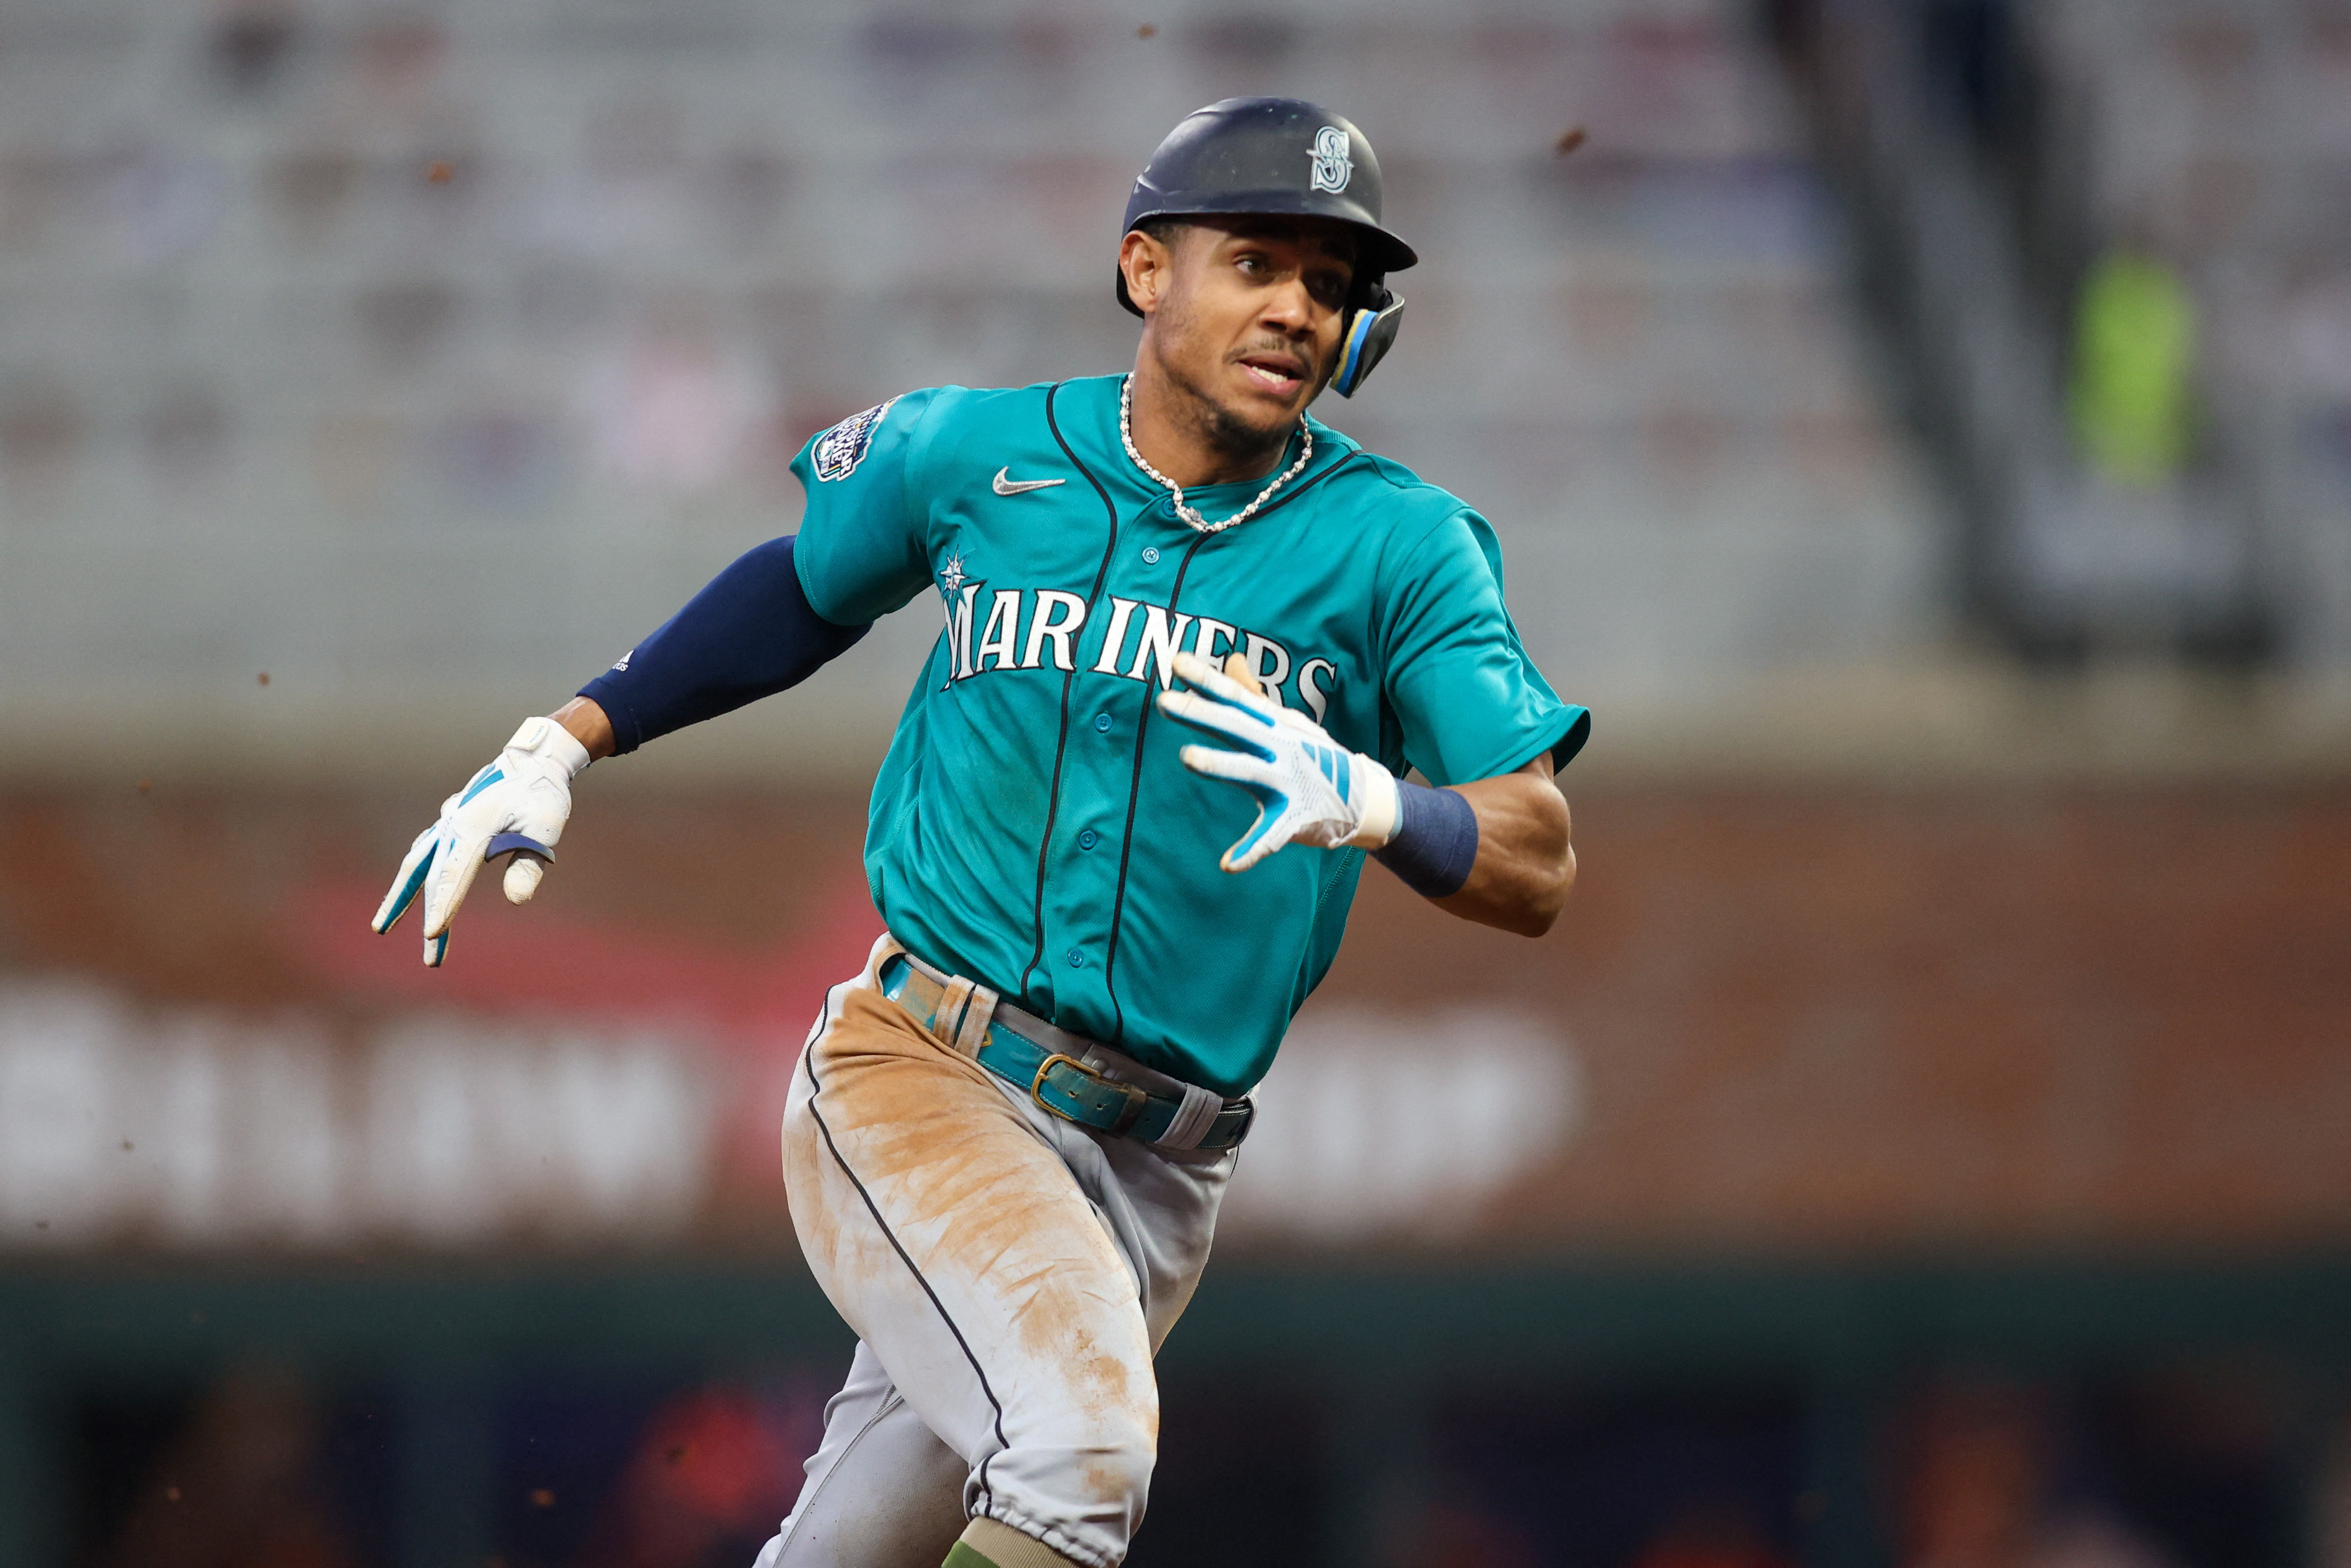 Gilbert records 15 straight outs, Mariners overpower Braves, 7-3